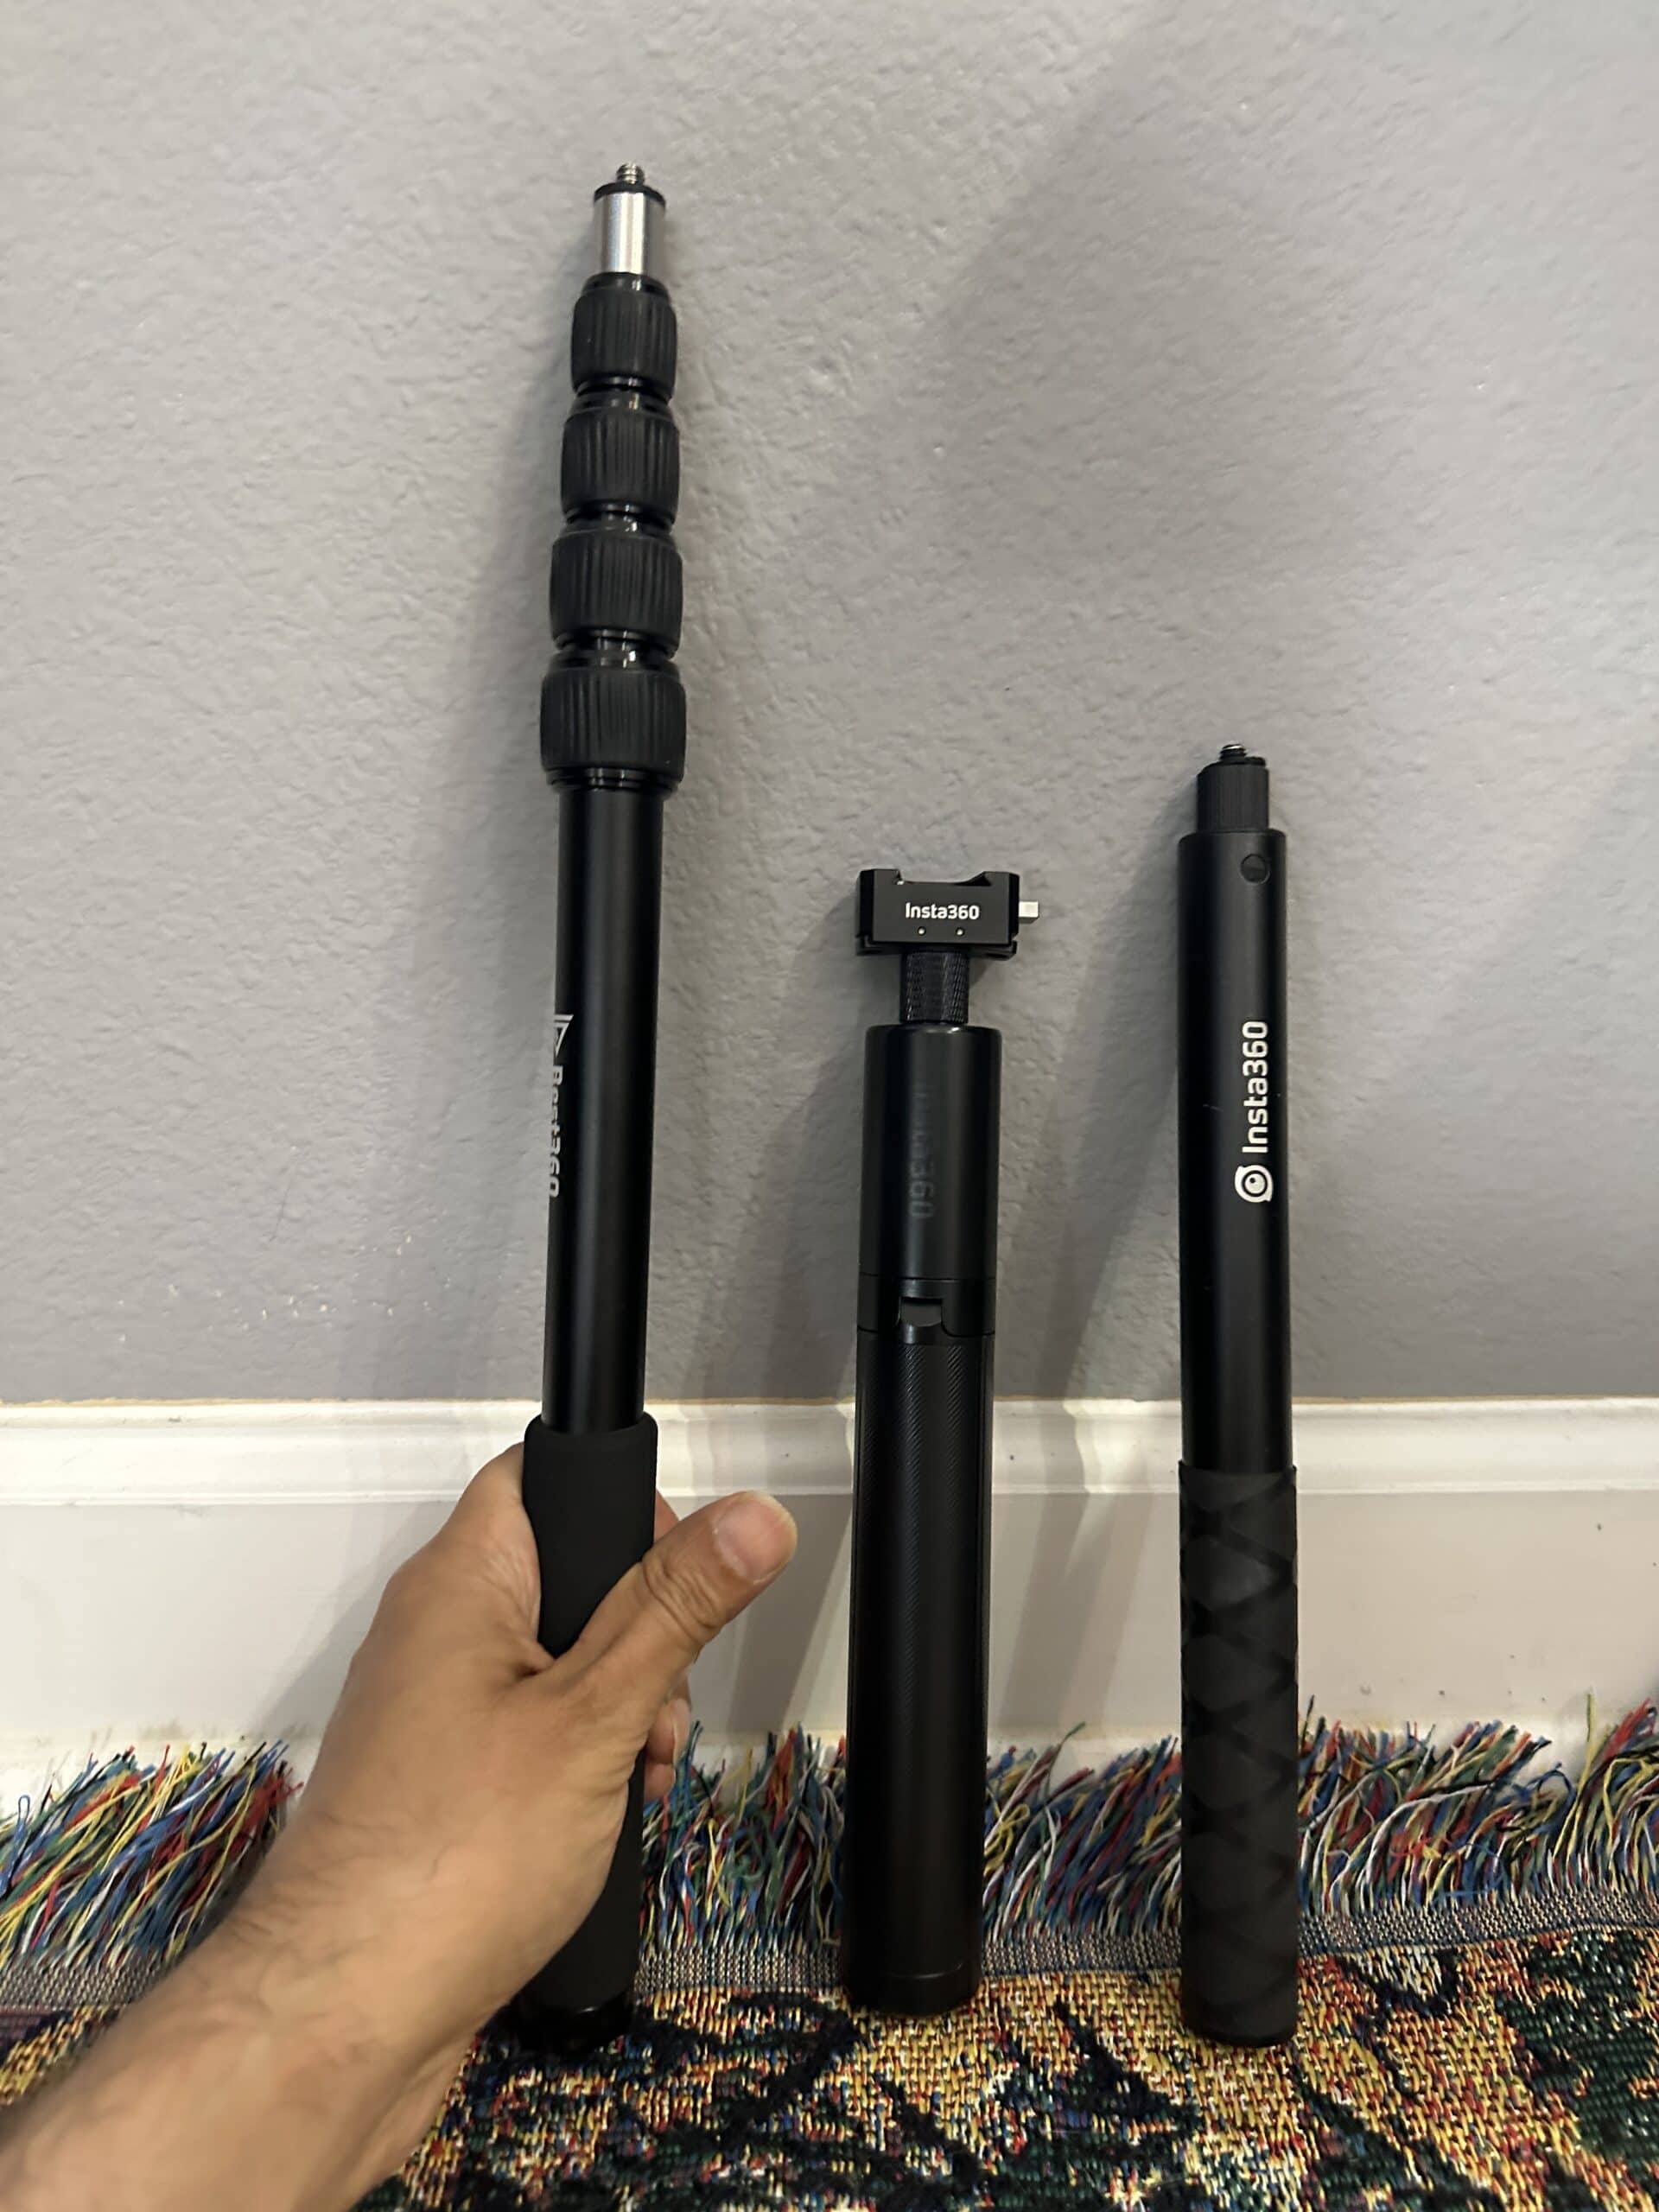 best360, insta360 2in1 ,insta360 invisible collapsed- examples of invisible selfie stick monopods
